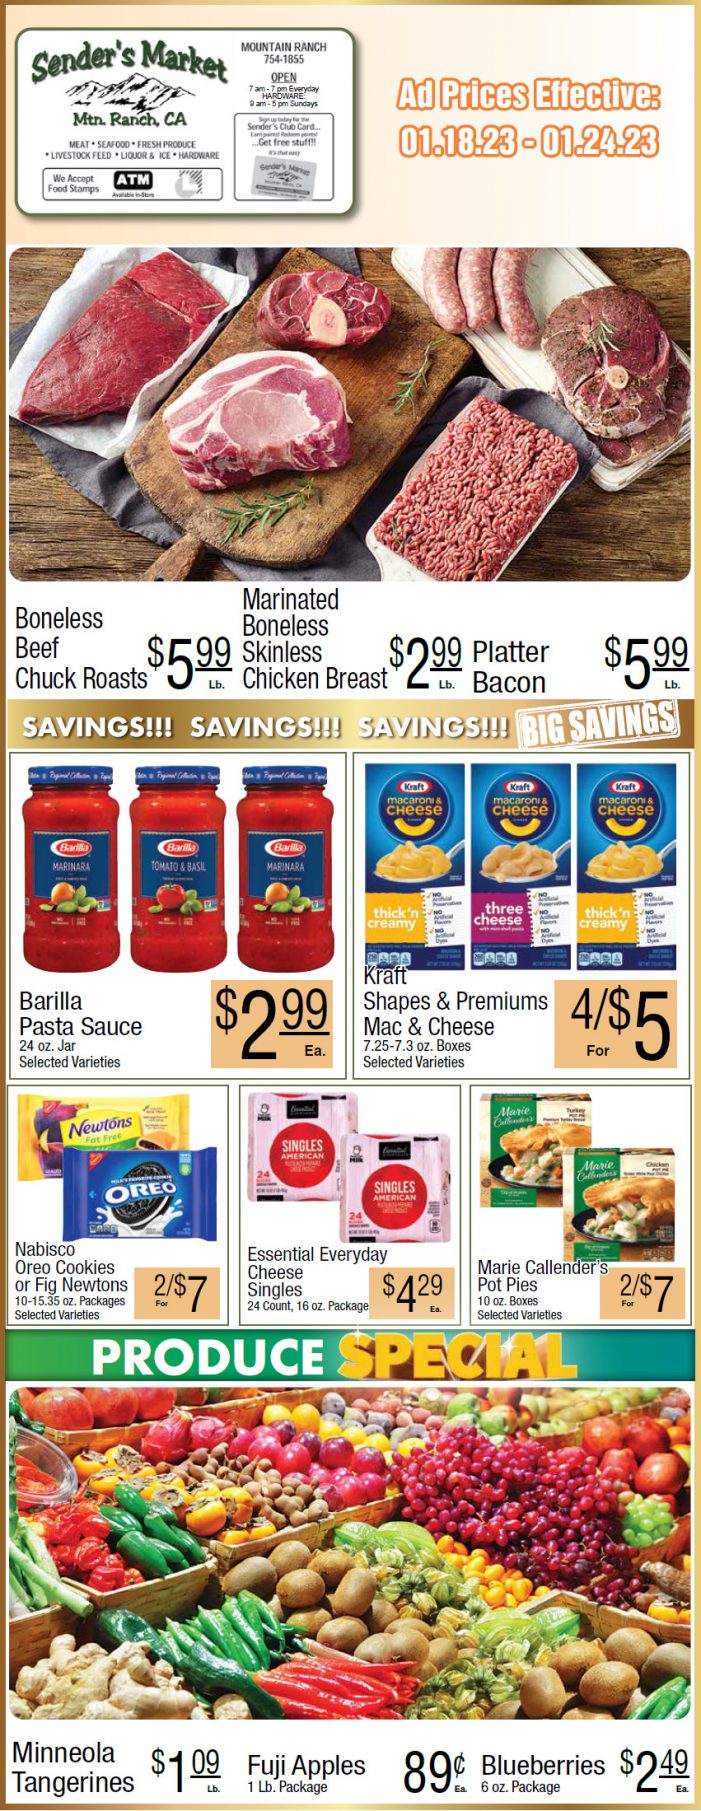 Sender’s Market Weekly Ad & Grocery Specials Jan 18 – 24th! Shop Local & Save!!